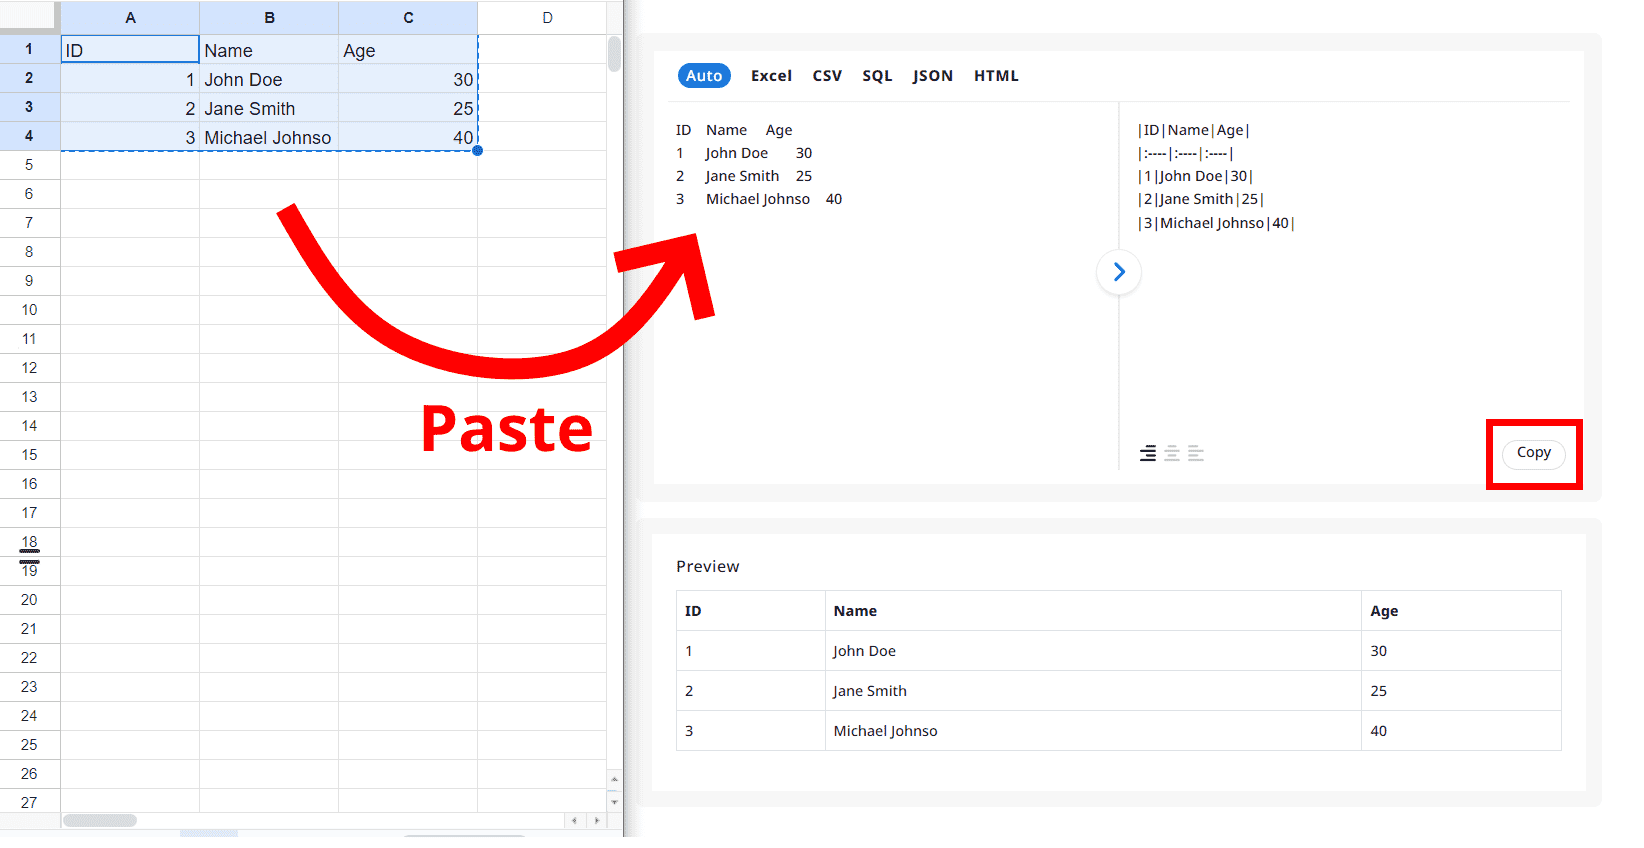 Copy and paste tables from EXCEL or spreadsheets into the input text area, then copy the execution result.